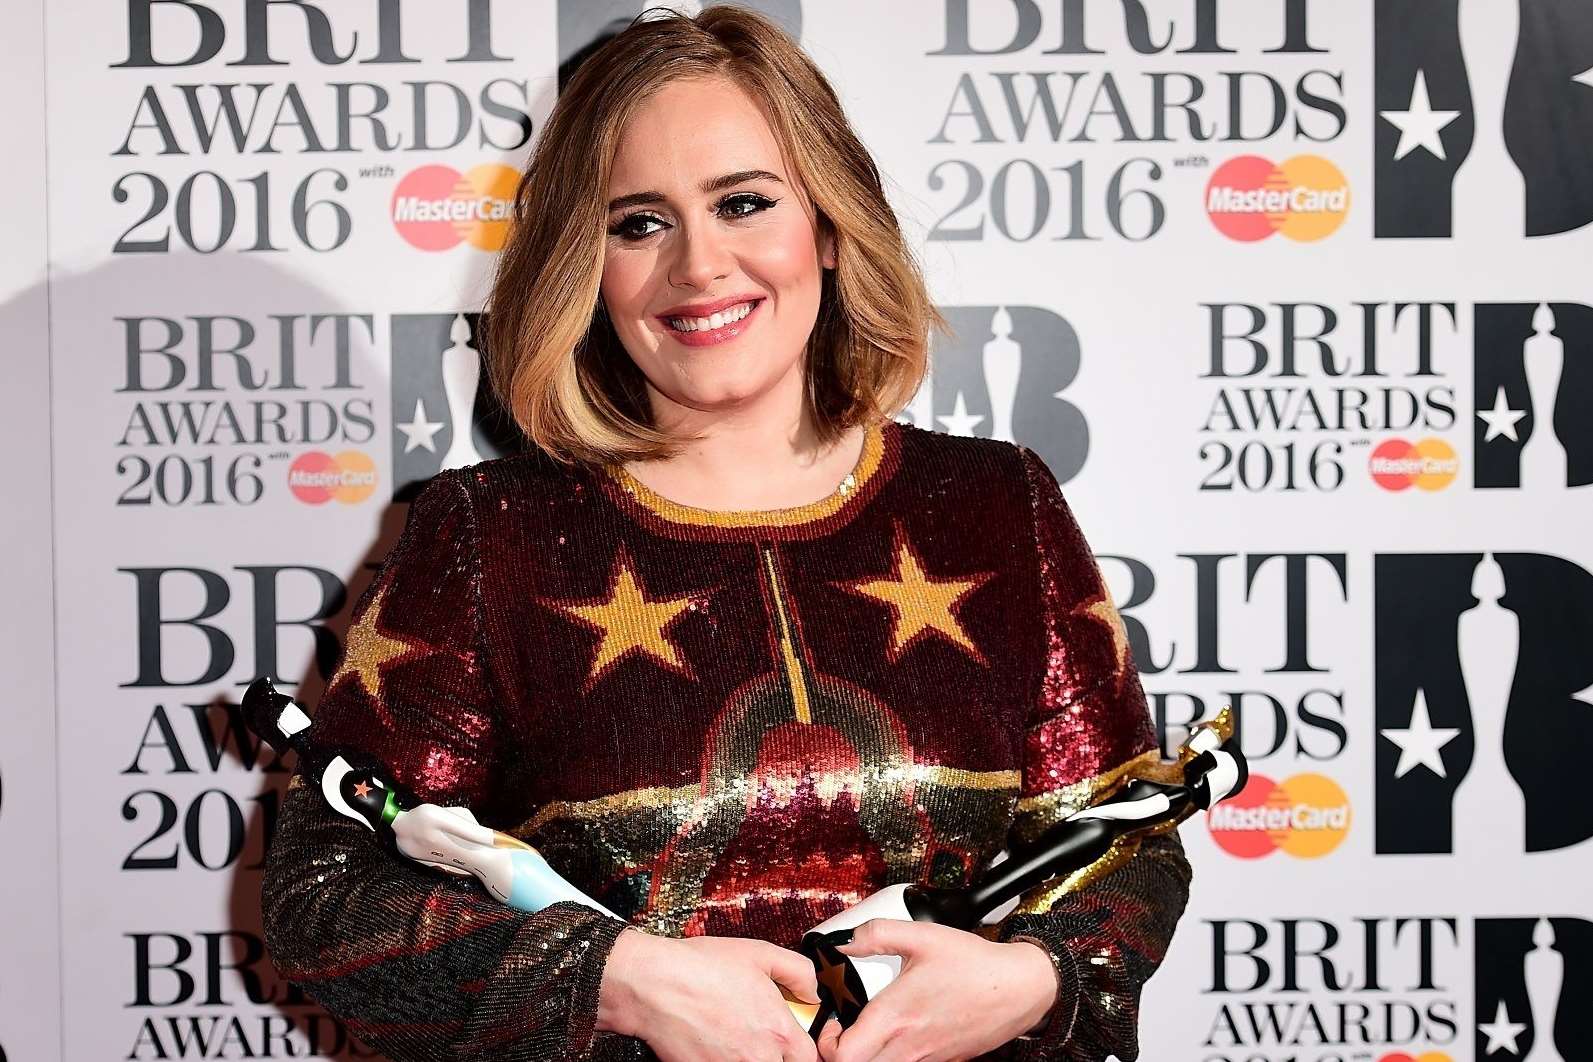 Adele has sold more than 100 million records